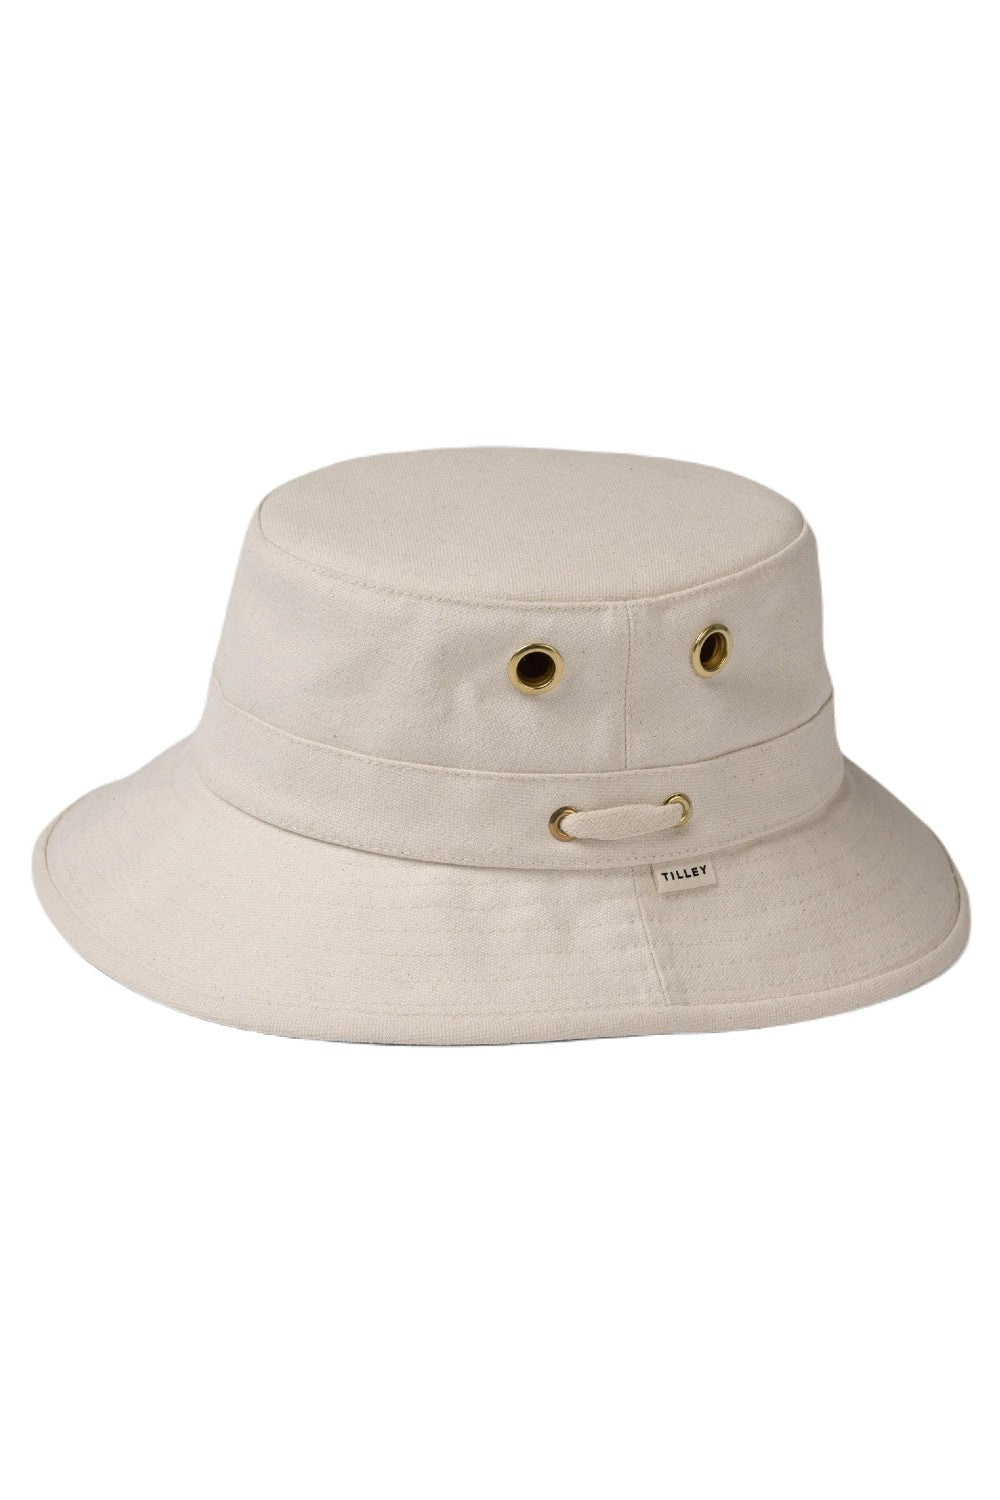 Tilley Hats Iconic Bucket Hat In Natural 